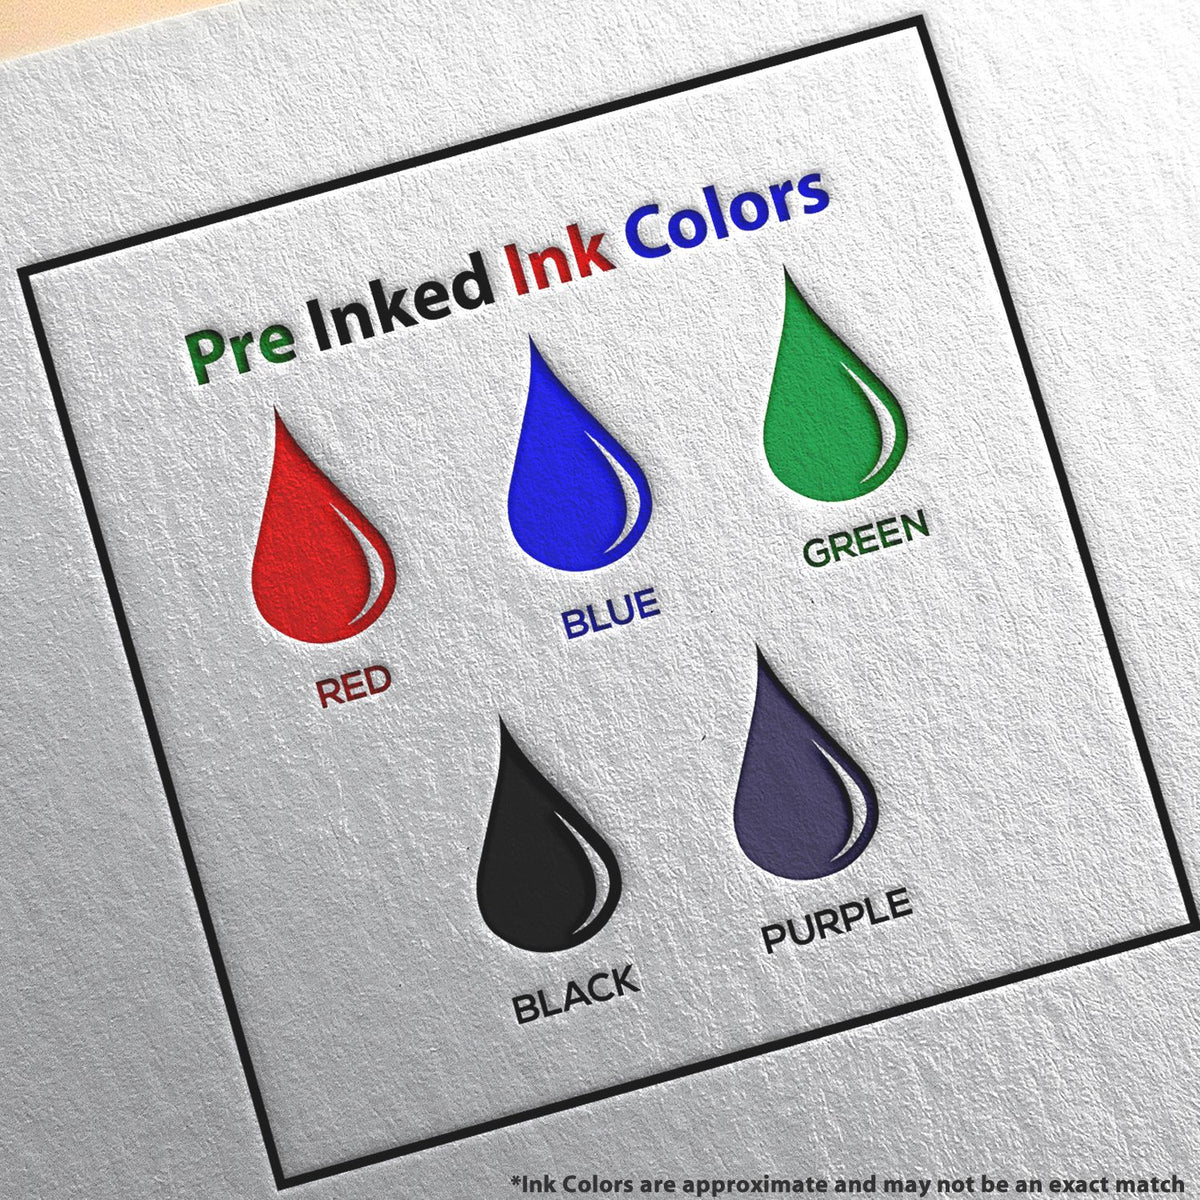 A picture showing the different ink colors or hues available for the Premium MaxLight Pre-Inked Arizona Landscape Architectural Stamp product.